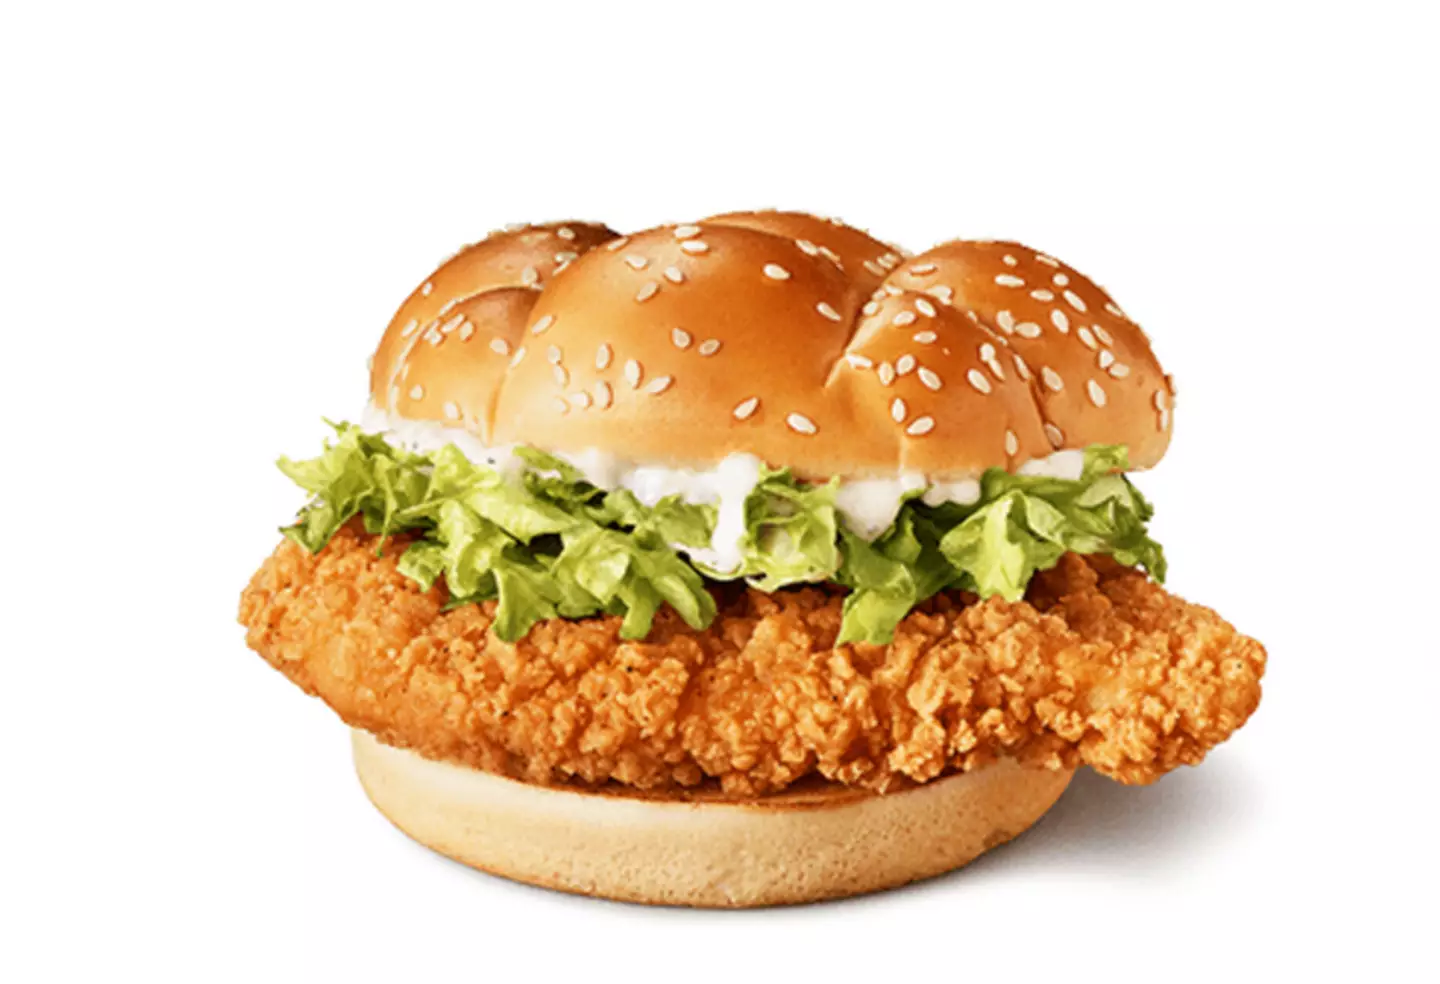 You'll have to be quick to get a Chicken Legend before it disappears.